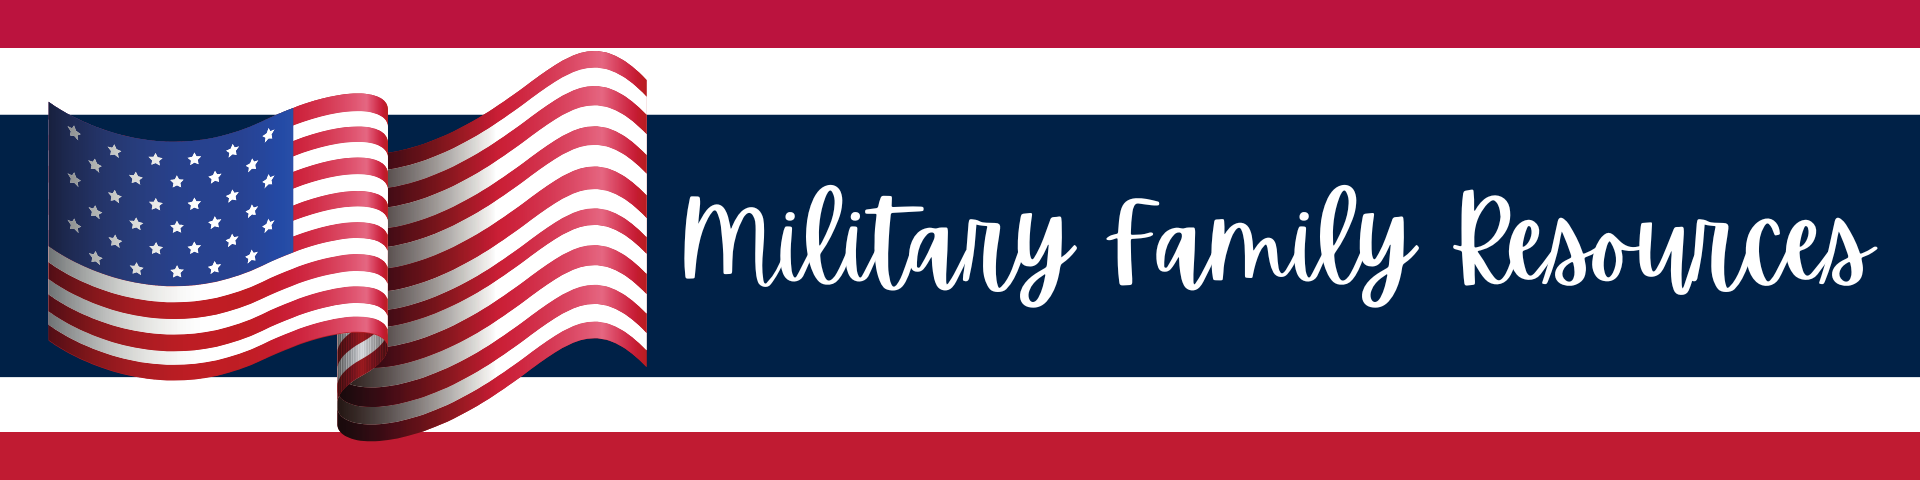 Military Family Resources